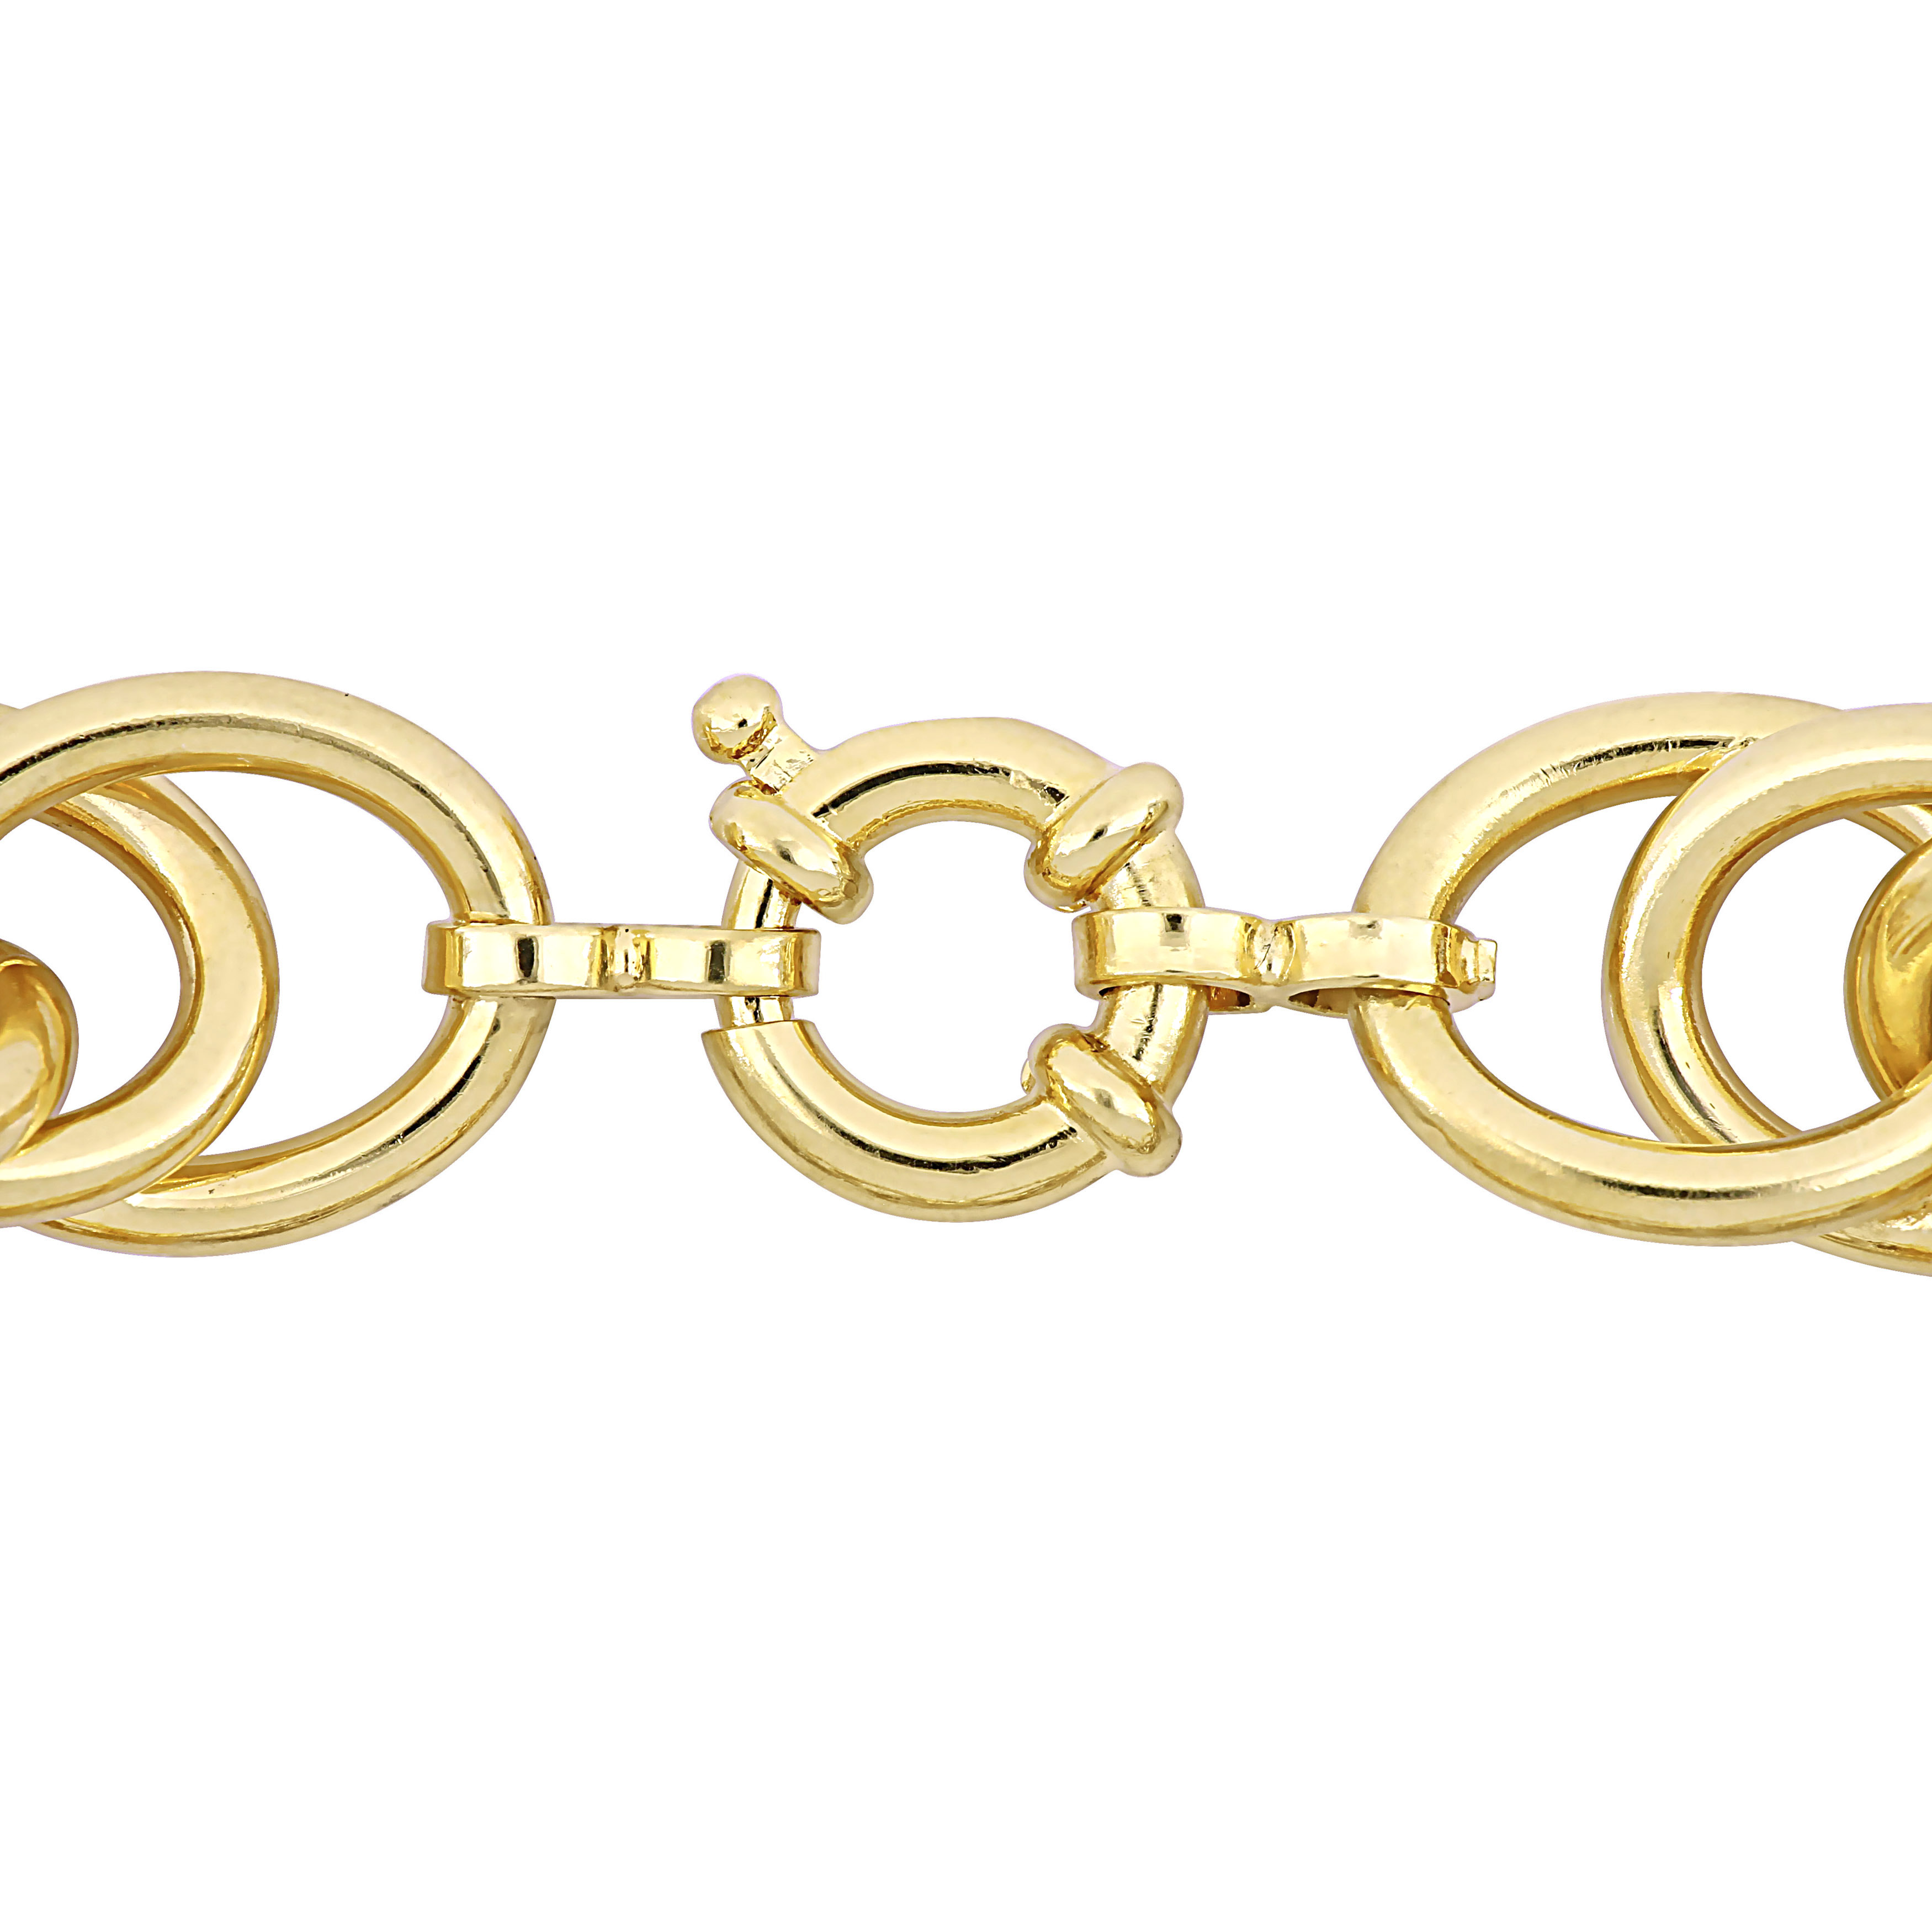 Oval Link Bracelet in Yellow Plated Sterling Silver - 8 in.